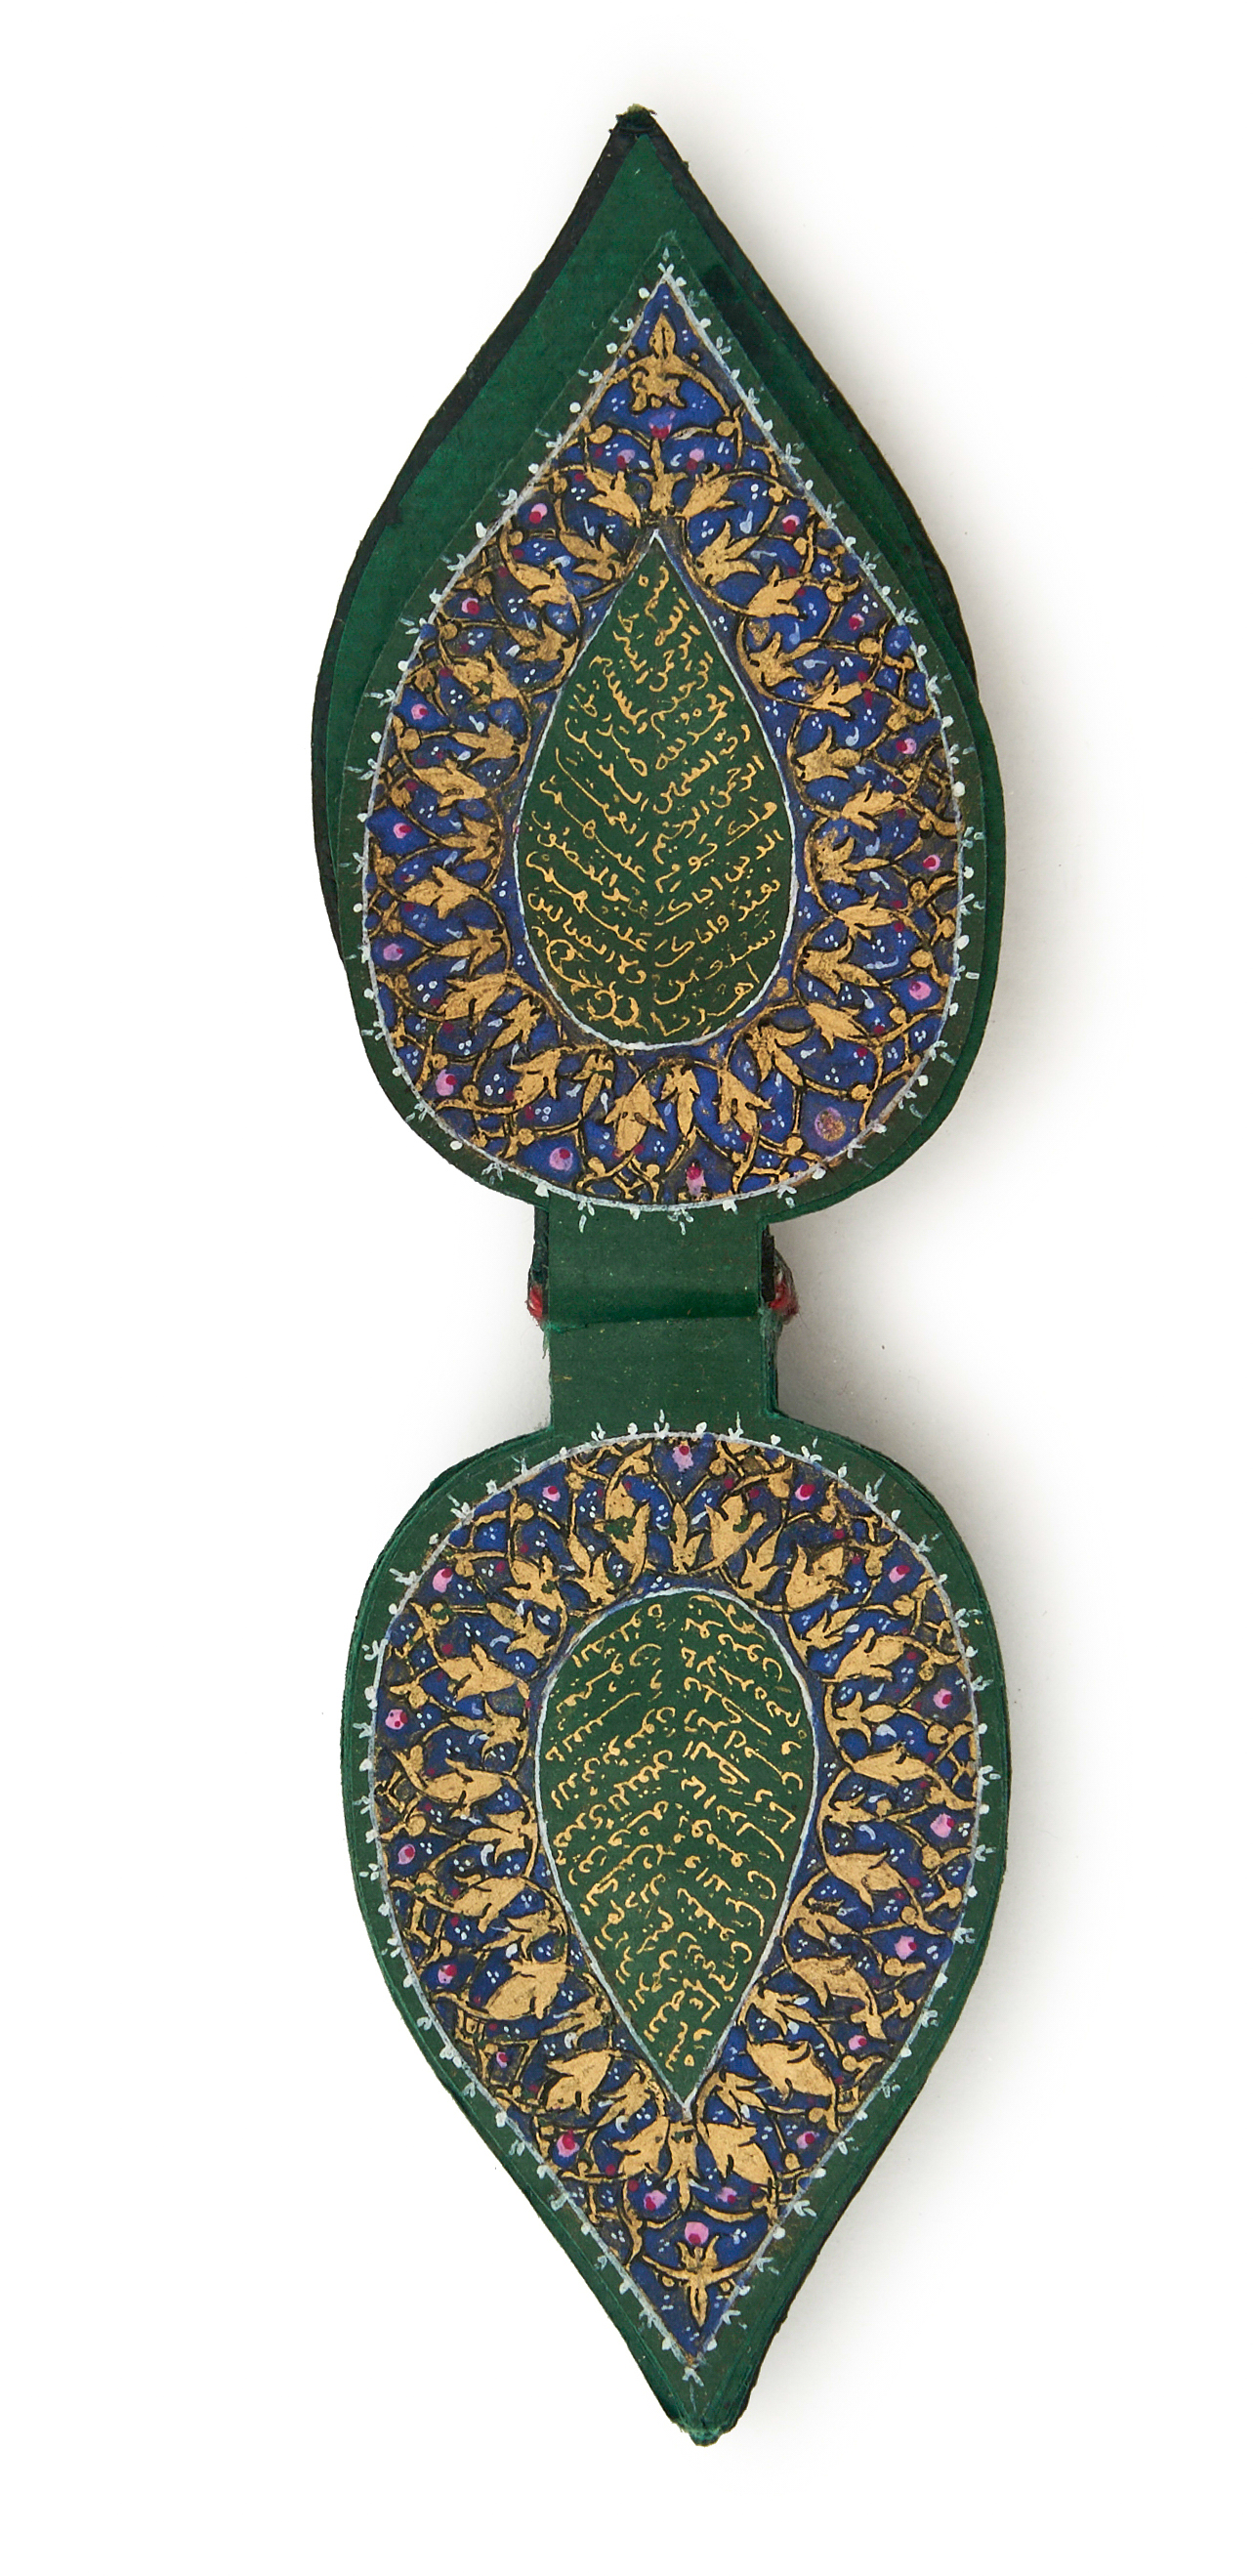 A GREEN ILLUMINATED MINIATURE QURAN IN THE FORM OF A LEAF, MUGHAL, INDIA, 19TH CENTURY OR LATER